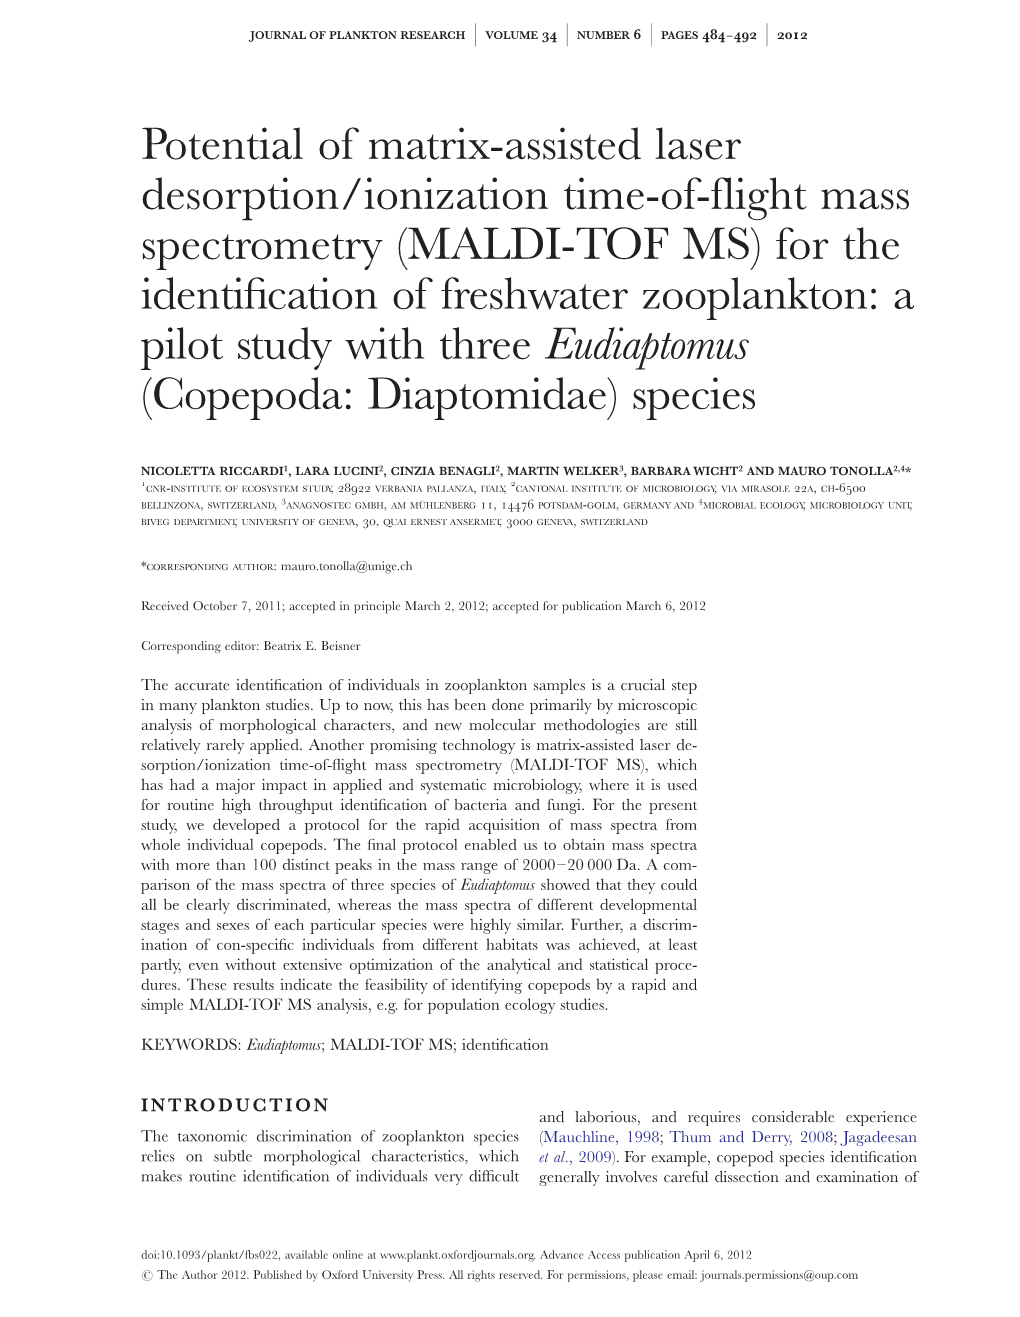 MALDI-TOF MS) for the Identiﬁcation of Freshwater Zooplankton: a Pilot Study with Three Eudiaptomus (Copepoda: Diaptomidae) Species